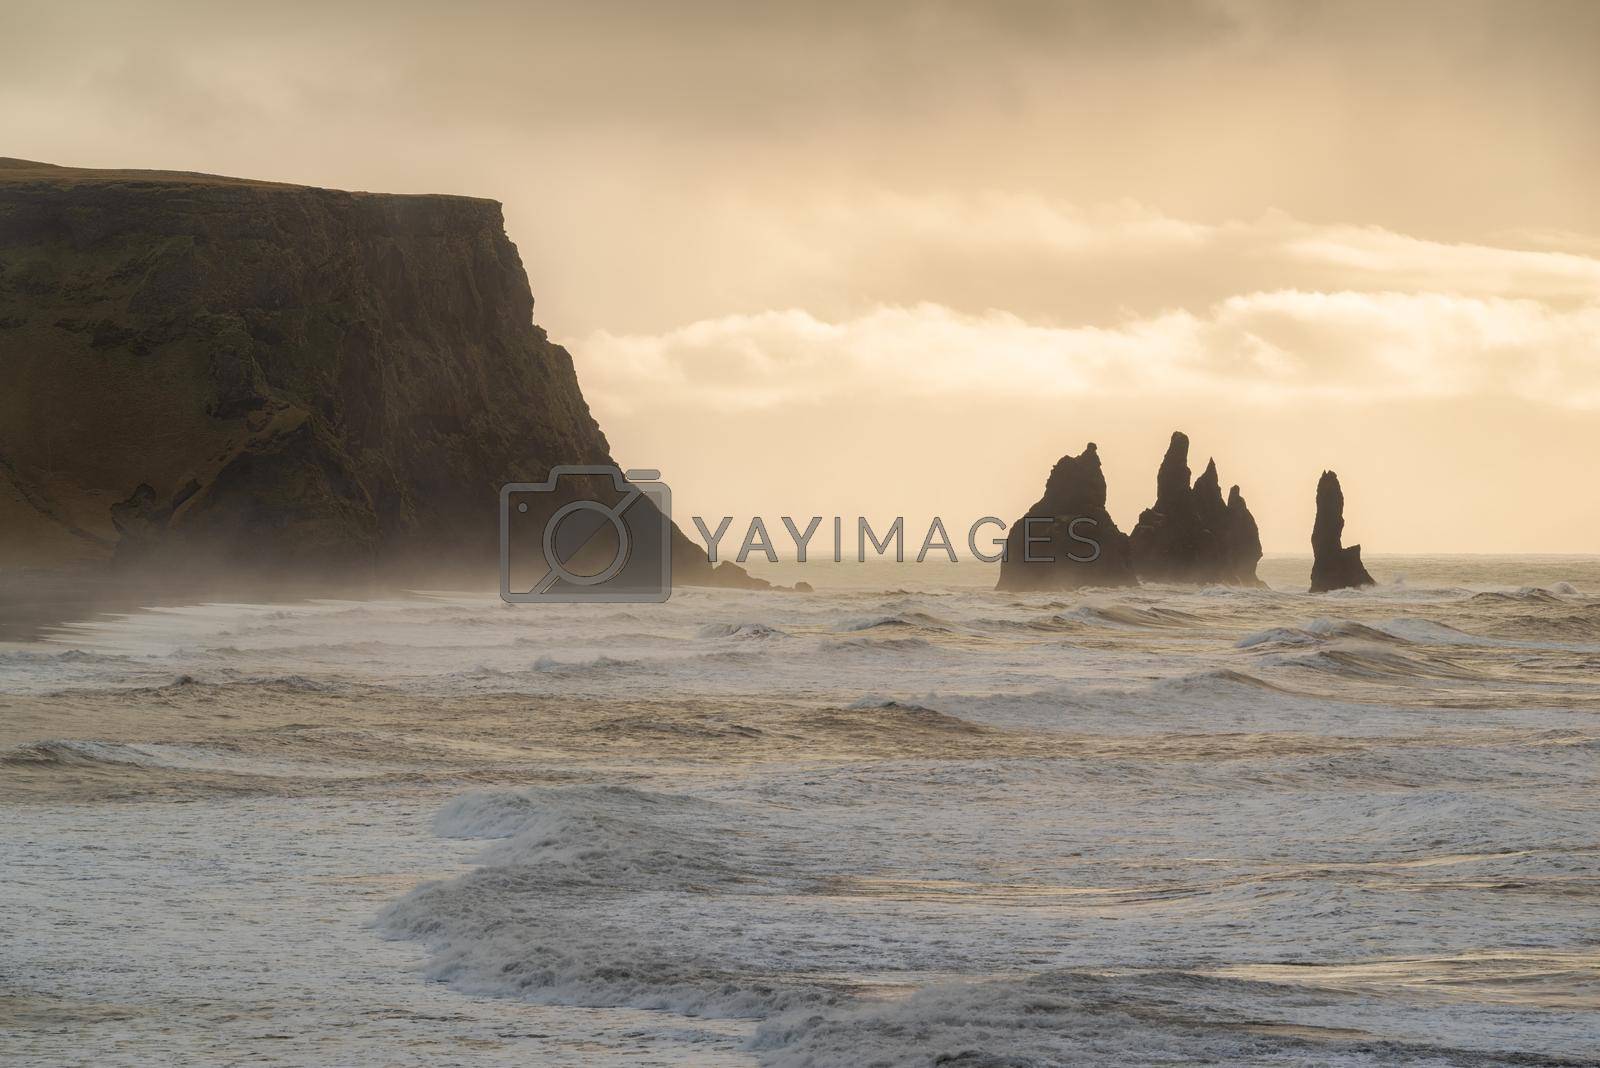 Royalty free image of Rock formation at Dyrholaey at sunset, Iceland by LuigiMorbidelli